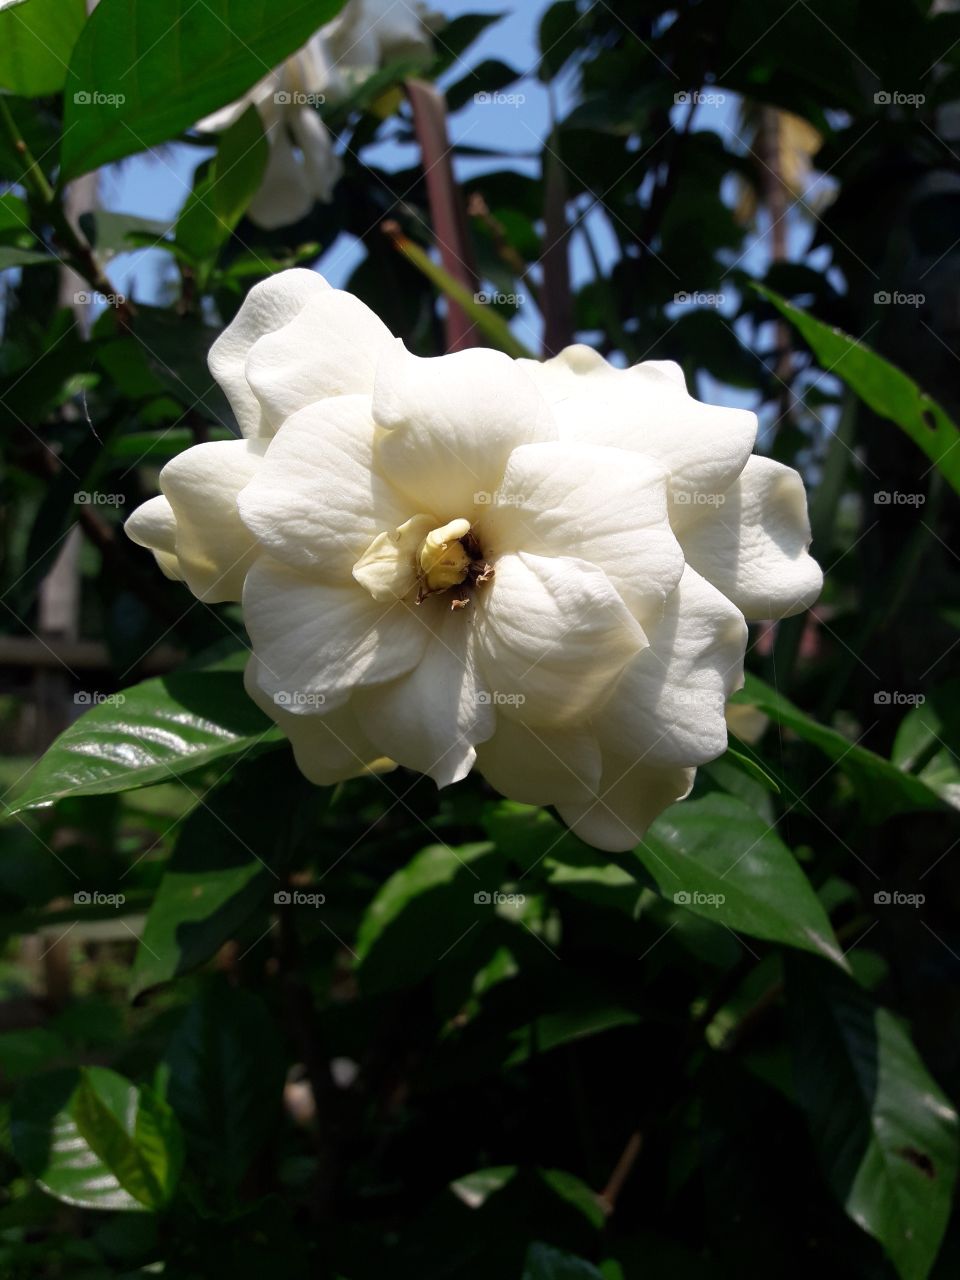 Gardenia blooming flower, white colour flower with green leaf.